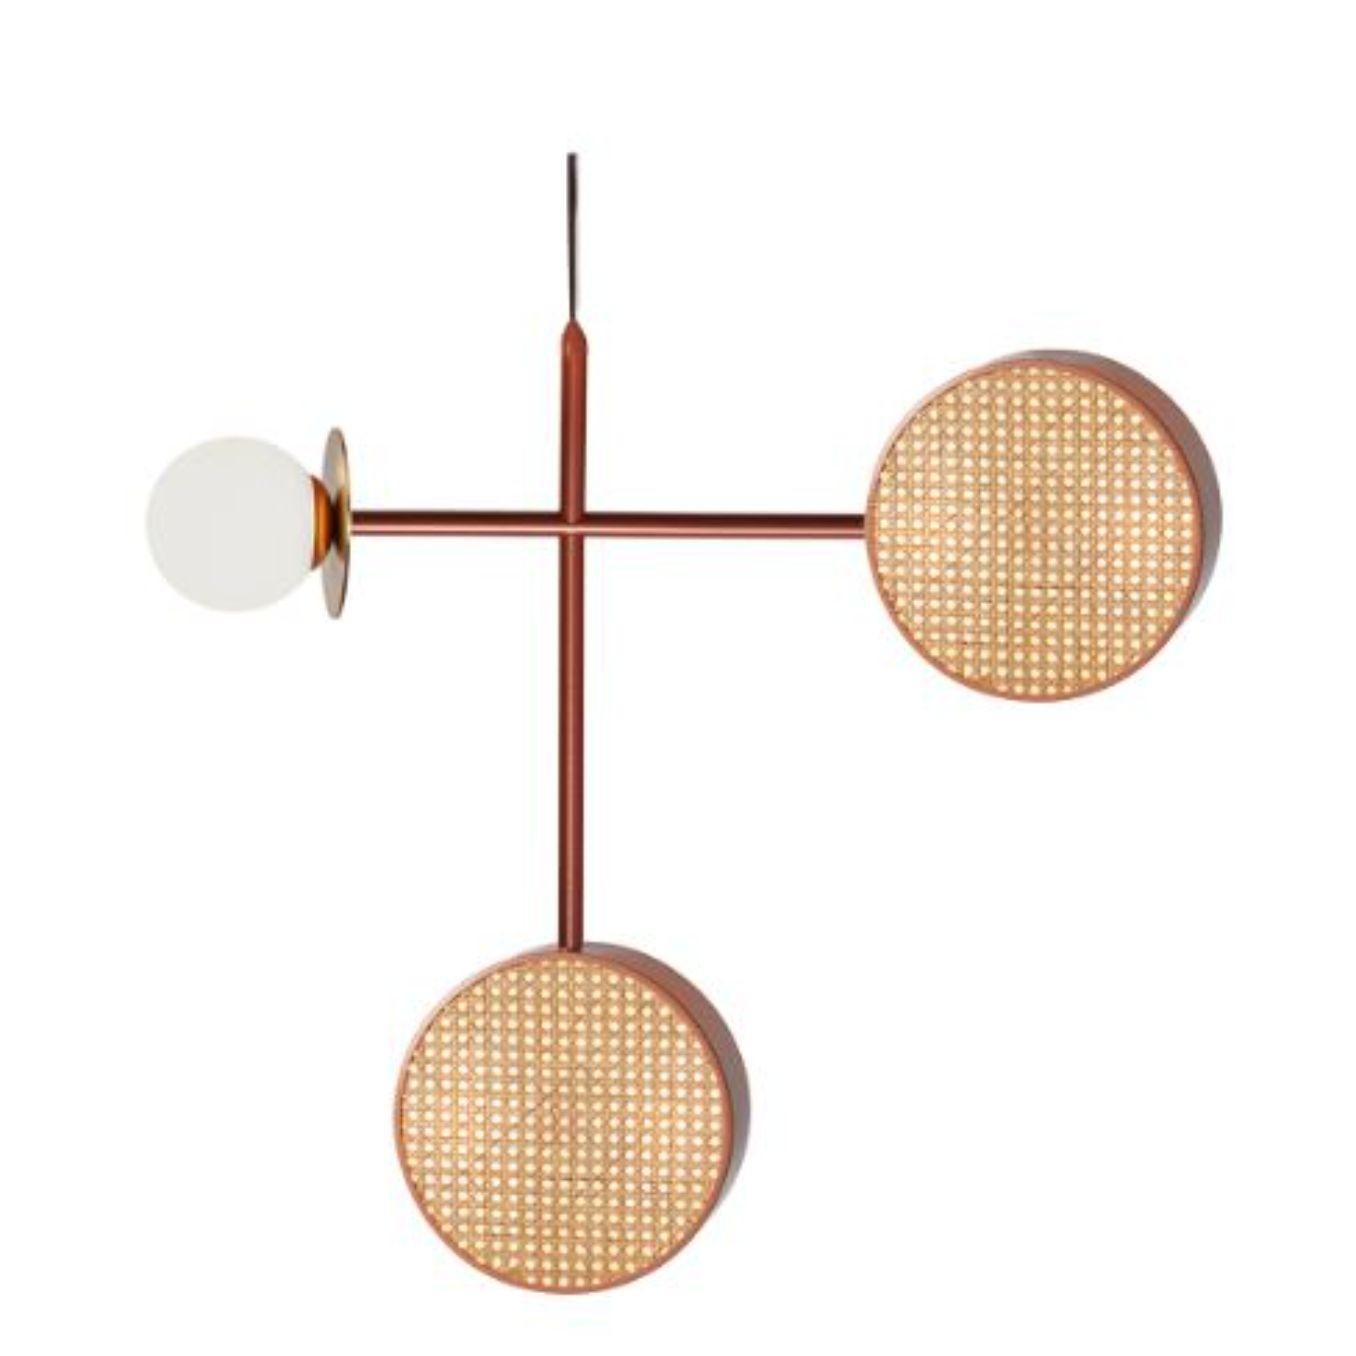 Monaco I suspension lamp by Dooq
Dimensions: W 102 x D 27 x H 70 cm
Materials: lacquered metal, brass/nickel, rattan and wood spheres.

Information:
230V/50Hz
5 x max. G9
4W LED

120V/60Hz
5 x max. G9
4W LED

Cable: 59”/1,5m

All our lamps can be